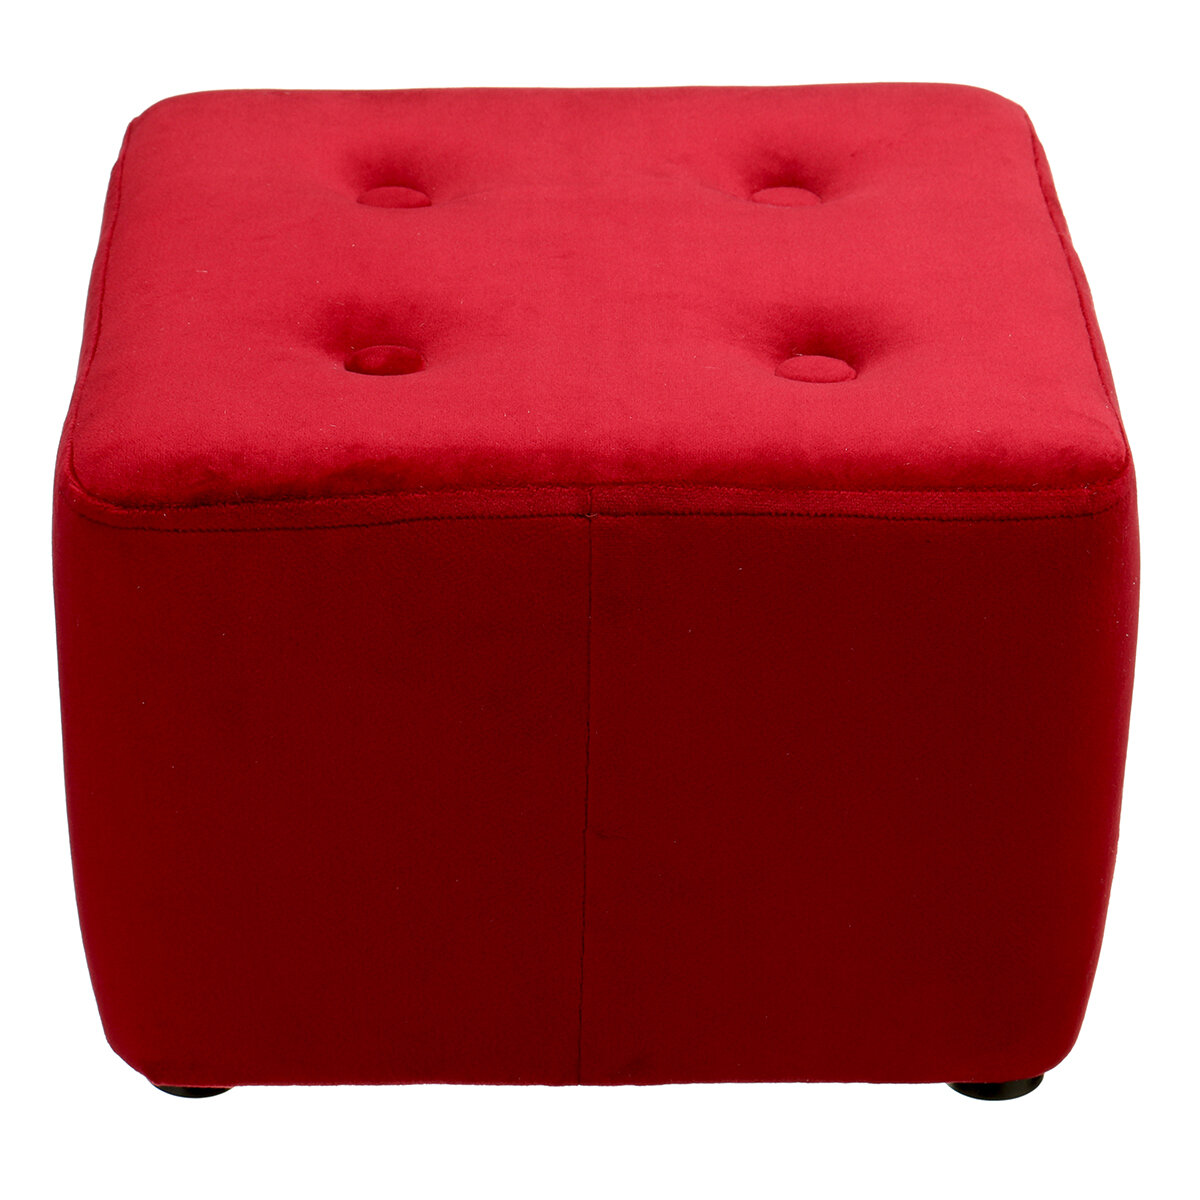 Image of Cube Footstool Soft Sofa Ottoman Footrest Seat Footstool Square Chair Home Office Furniture